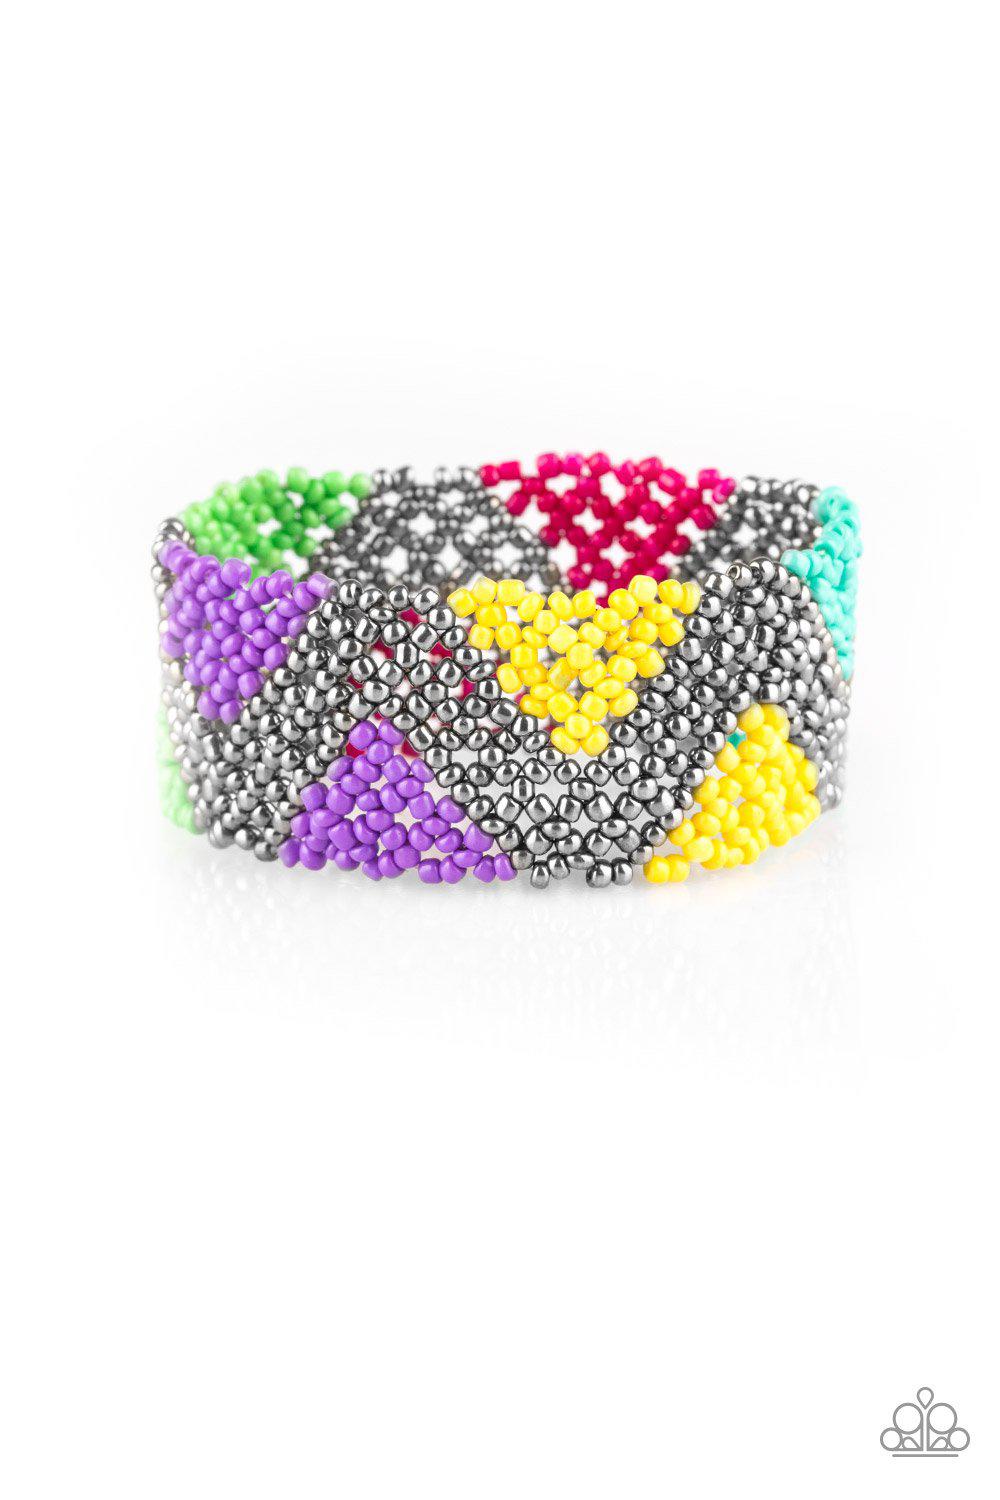 Desert Loom Multi-color Seed Bead Bracelet - Paparazzi Accessories-CarasShop.com - $5 Jewelry by Cara Jewels